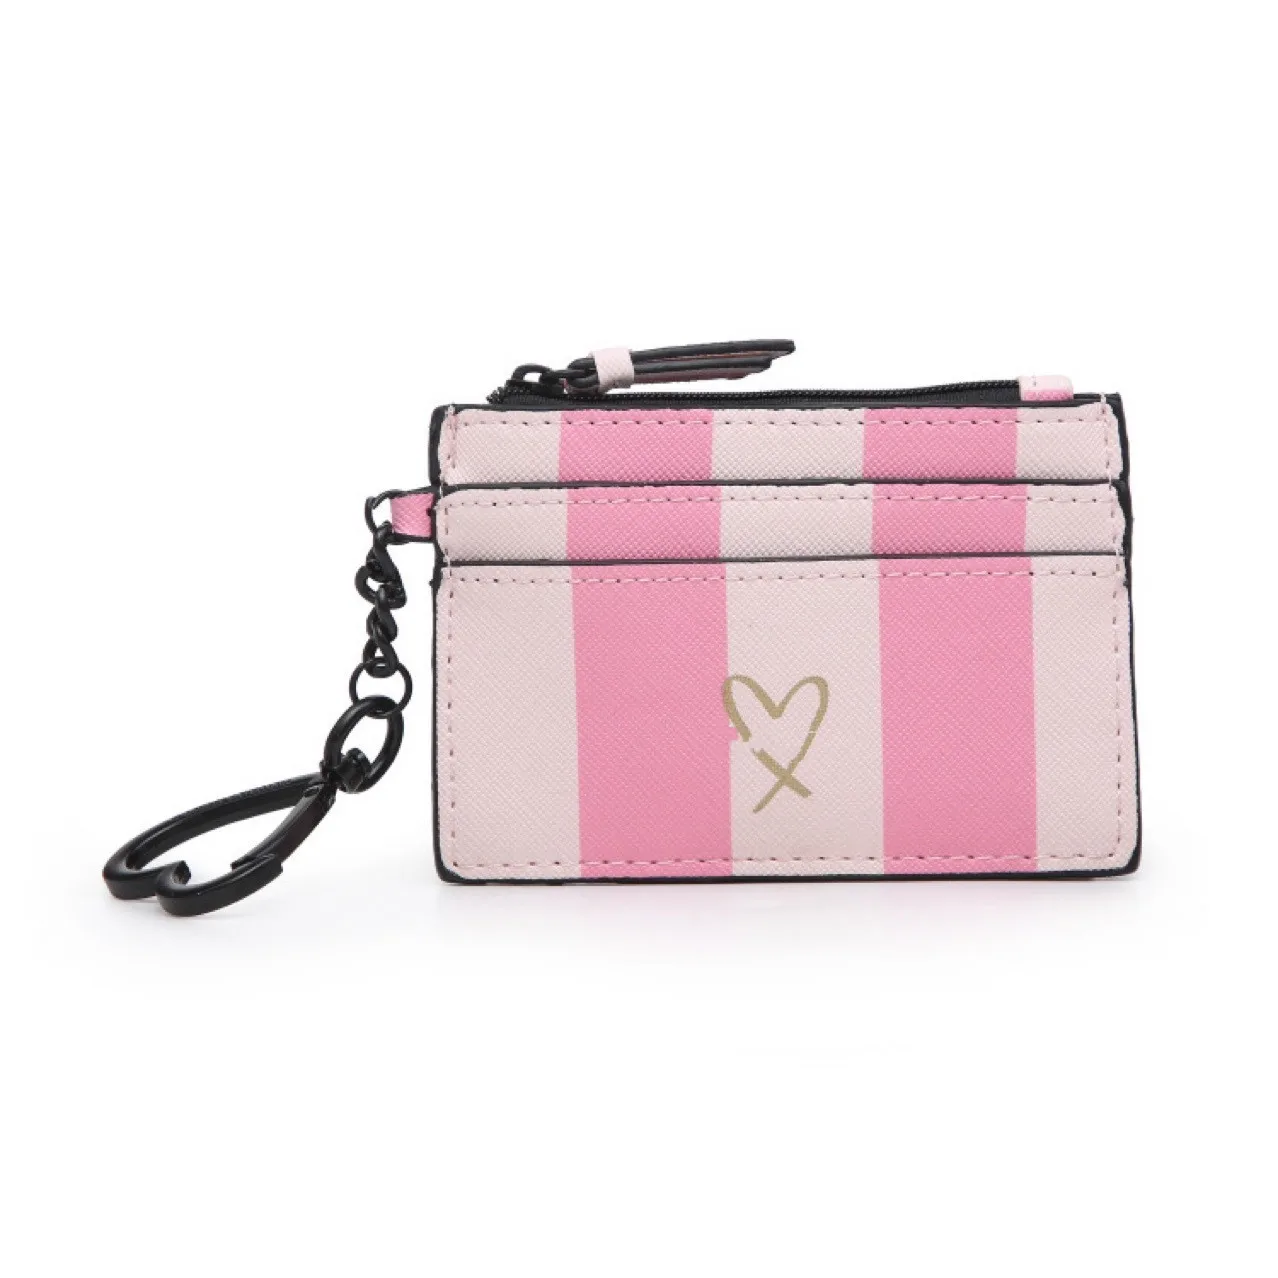 Victoria's Secret Key Pouch Credit Card Coin Wallet in Pink & White Stripe